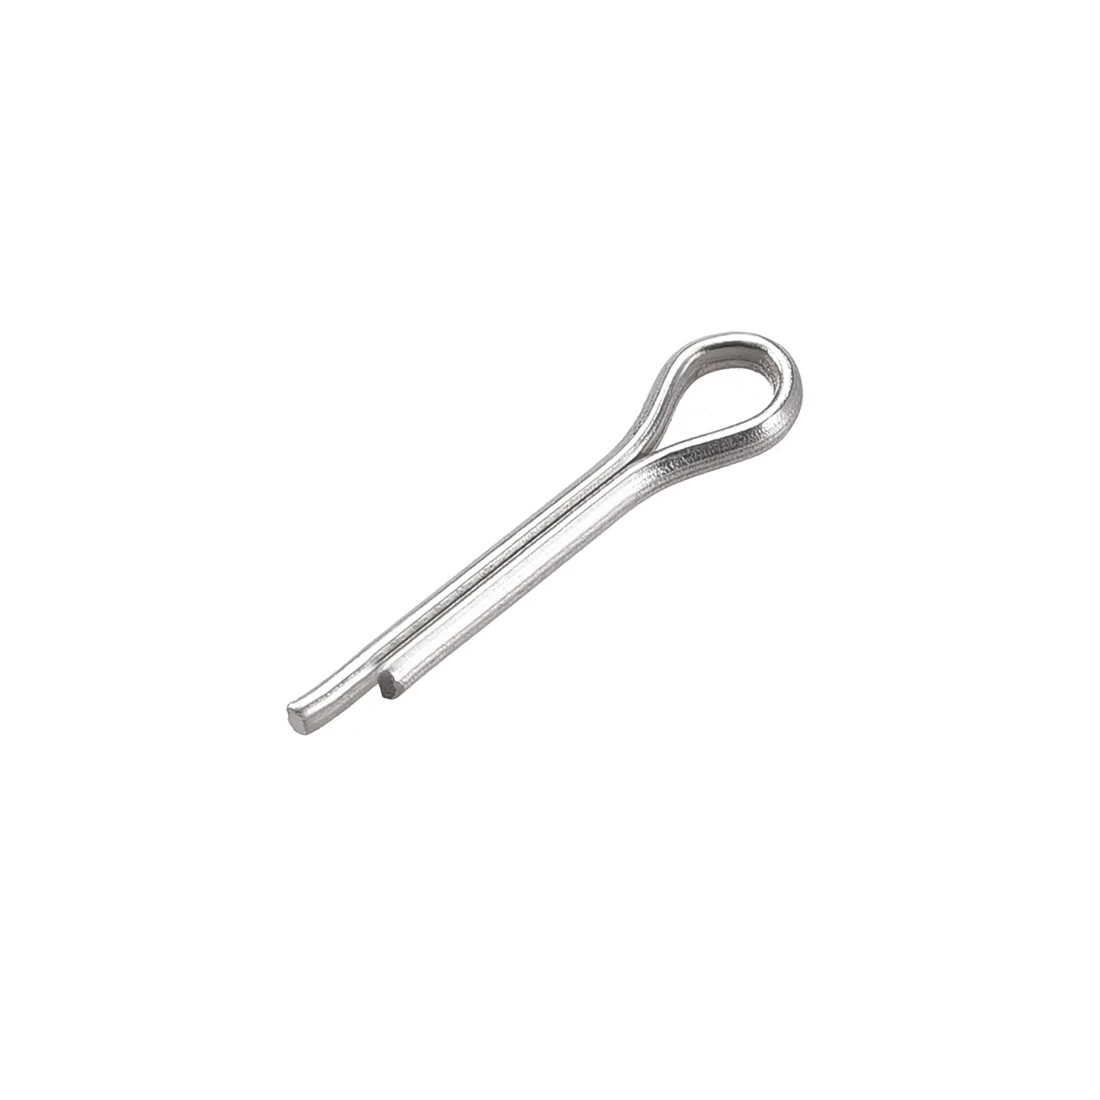 

uxcell 30Pcs Split Cotter Pin - 1.5mm x 8mm 304 Stainless Steel 2-Prongs Silver Tone for Home DIY Application